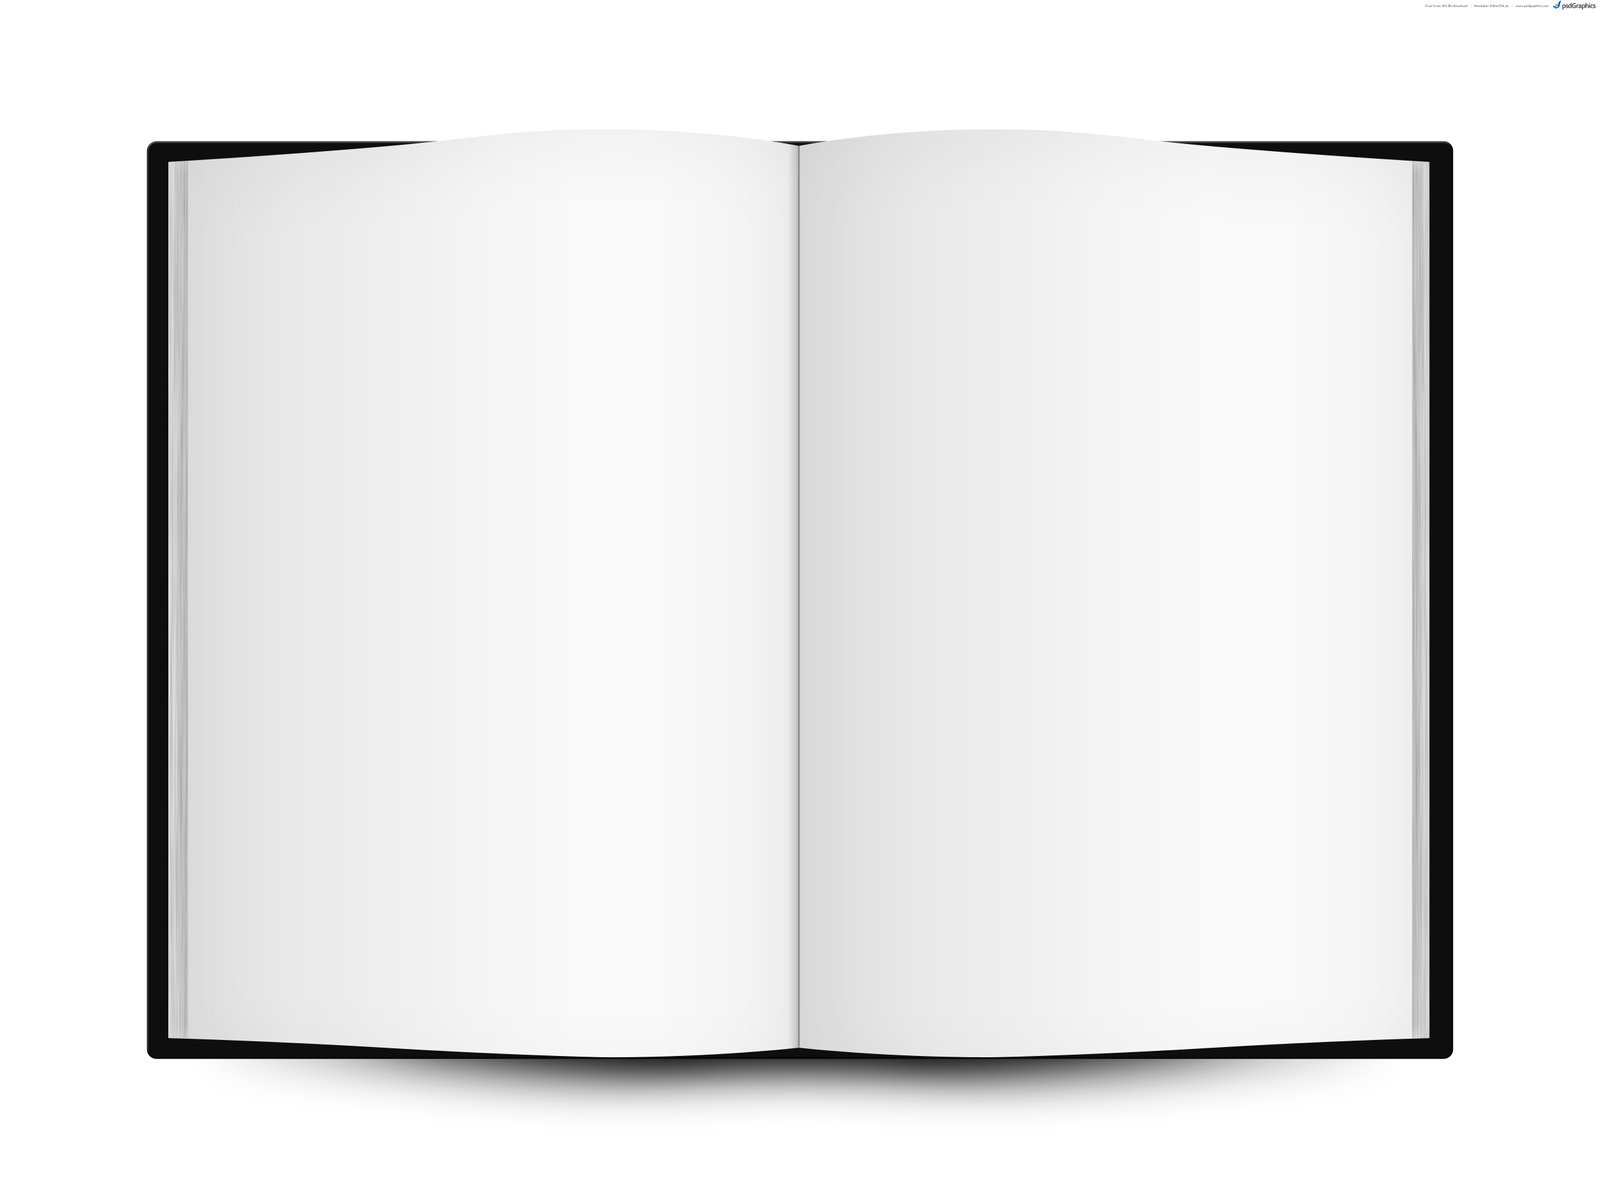 blank open book - open book with blank pages